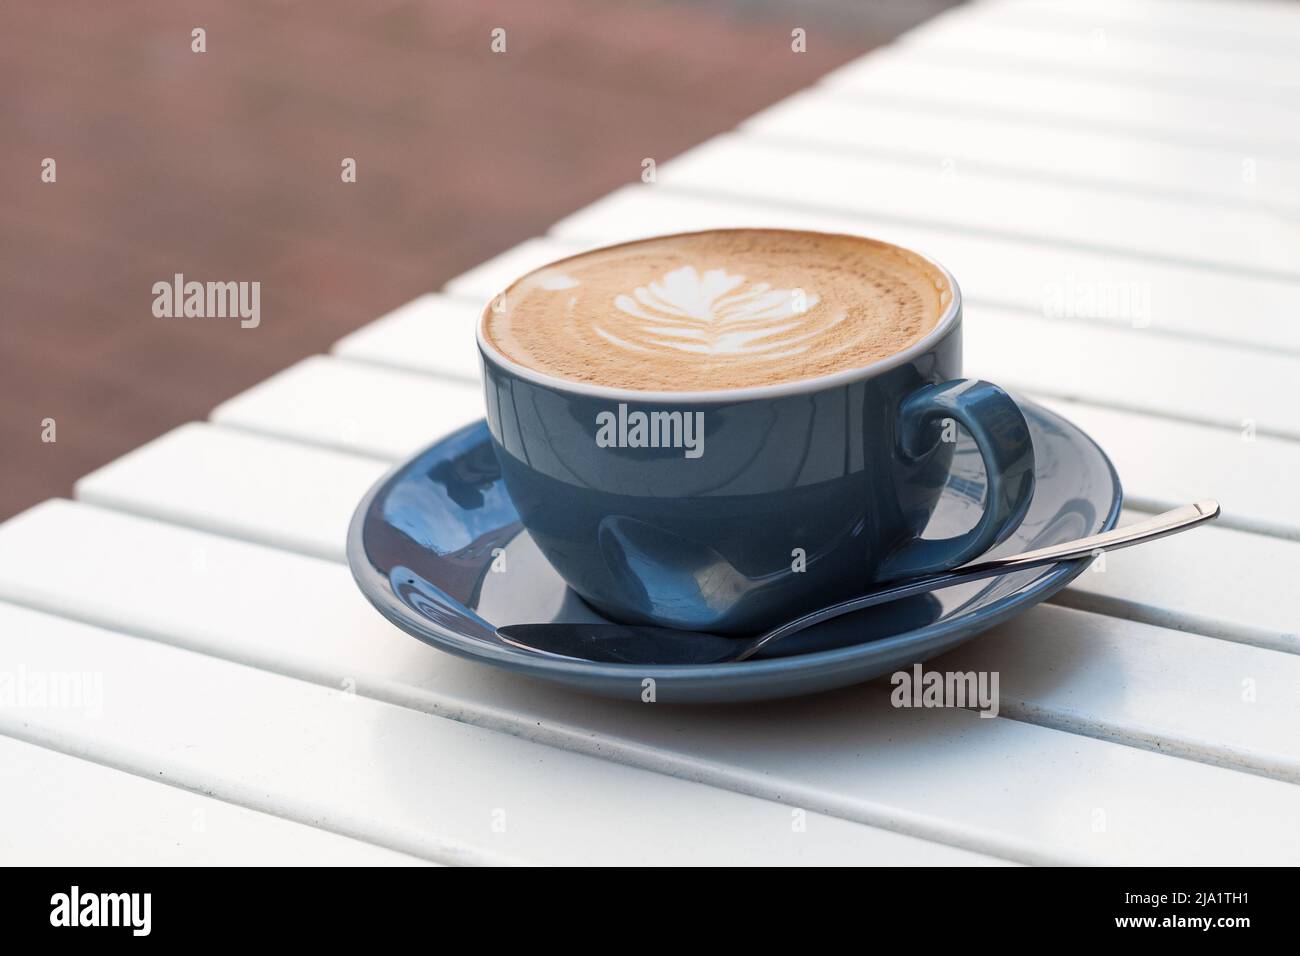 Shallow focus on the froth of flat white coffee in a blue cup and saucer with a teaspoon on the saucer. The coffee is on a white wooden slated table o Stock Photo